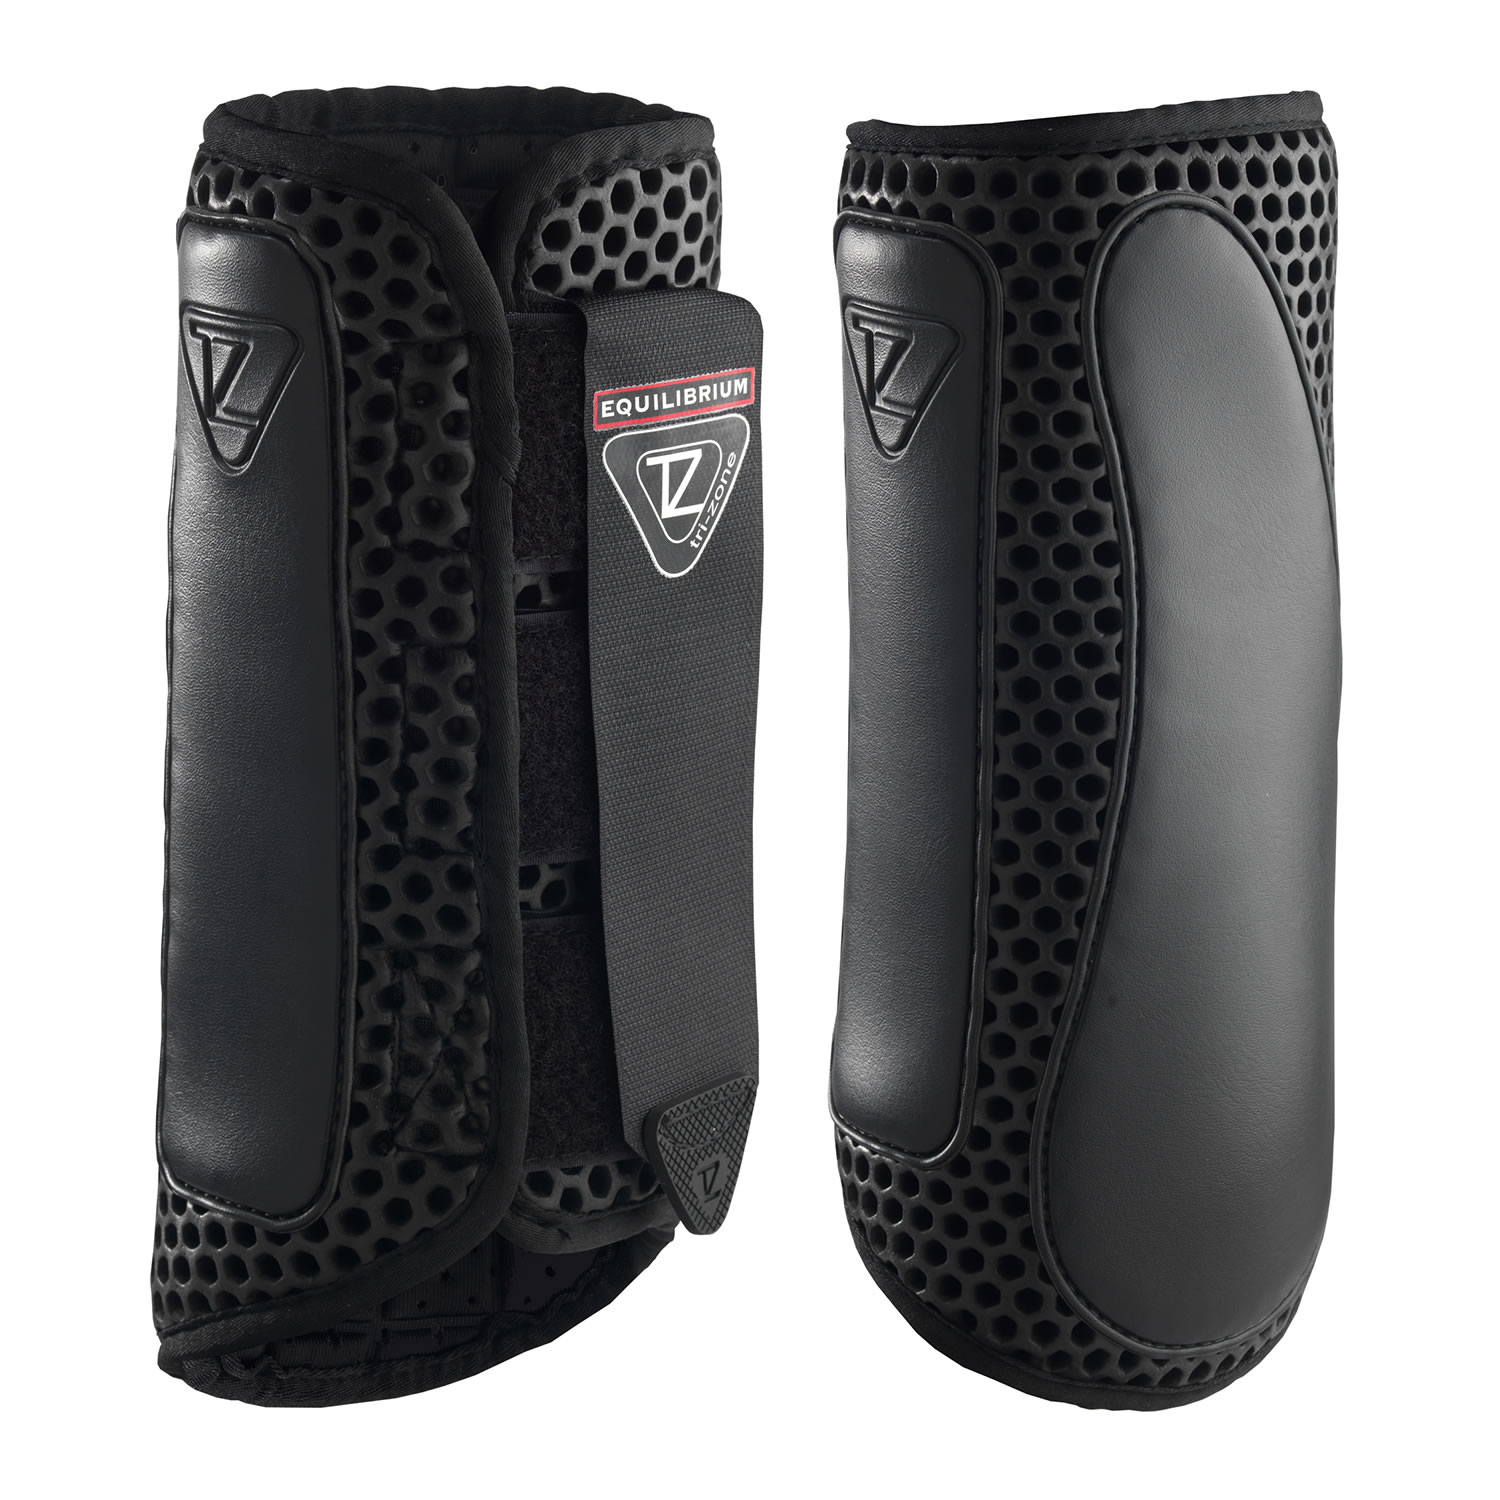 EQUILIBRIUM TRI-ZONE IMPACT SPORTS BOOTS BLACK HIND SMALL HIND SMALL HIND